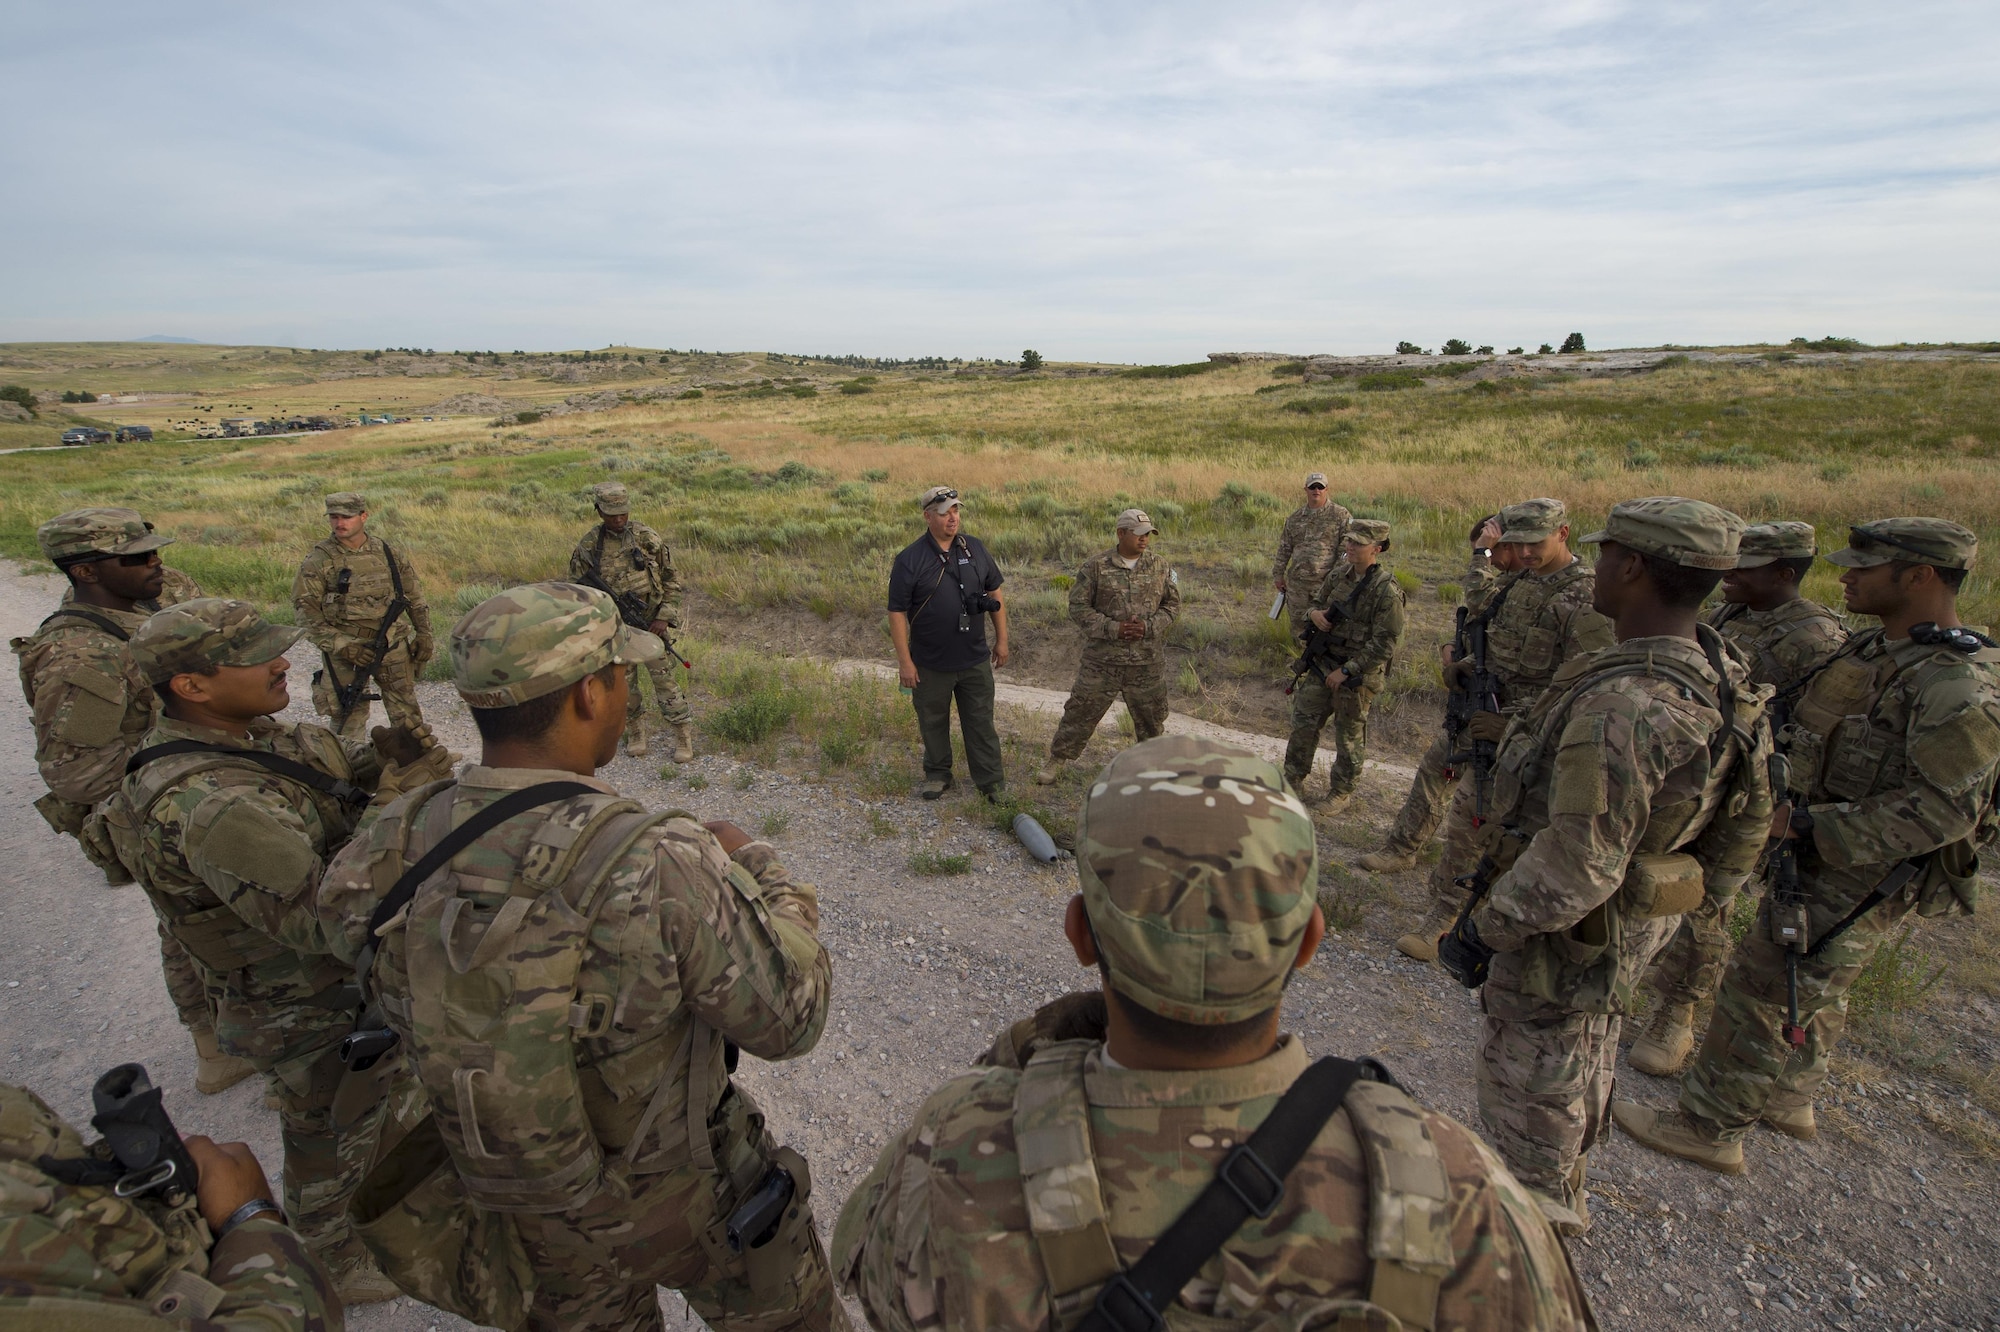 Cayle Harris, 620th Ground Combat Training Squadron counter improvised explosive device instructor, discusses Minot Air Force Base, N.D., 791st Missile Security Forces Squadron Airmen’s performance after a counter IED course at Camp Guernsey, Wyo., July 19, 2017. Harris is a retired U.S. Air Force master sergeant and served more than 20 years in the explosive ordinance disposal career field. (U.S. Air Force photo by Staff Sgt. Christopher Ruano)